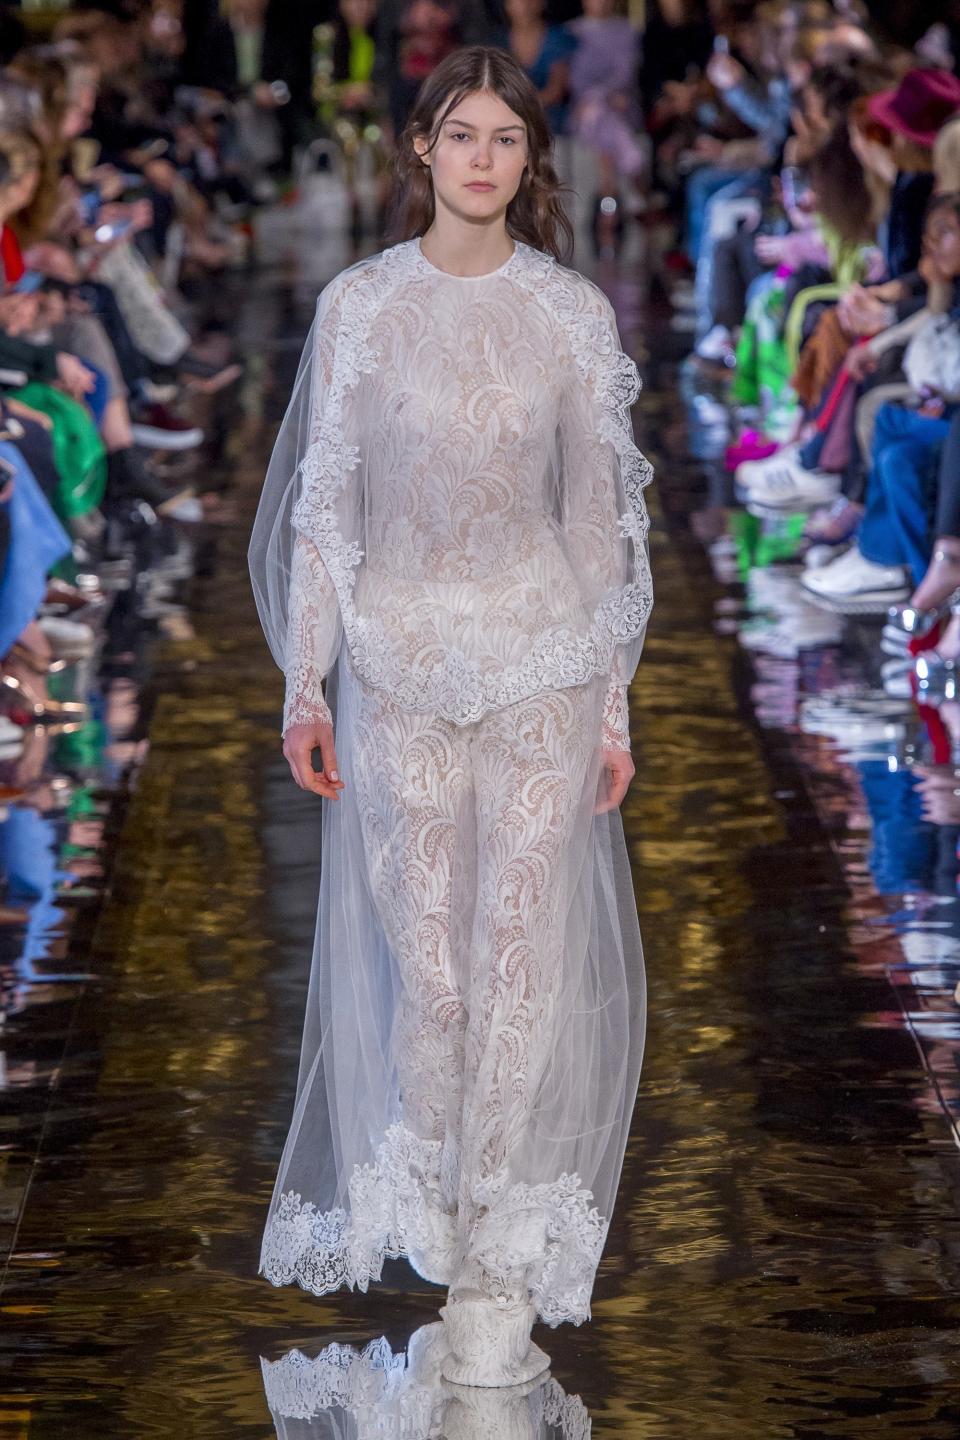 26 looks to take off the runway and down the aisle.